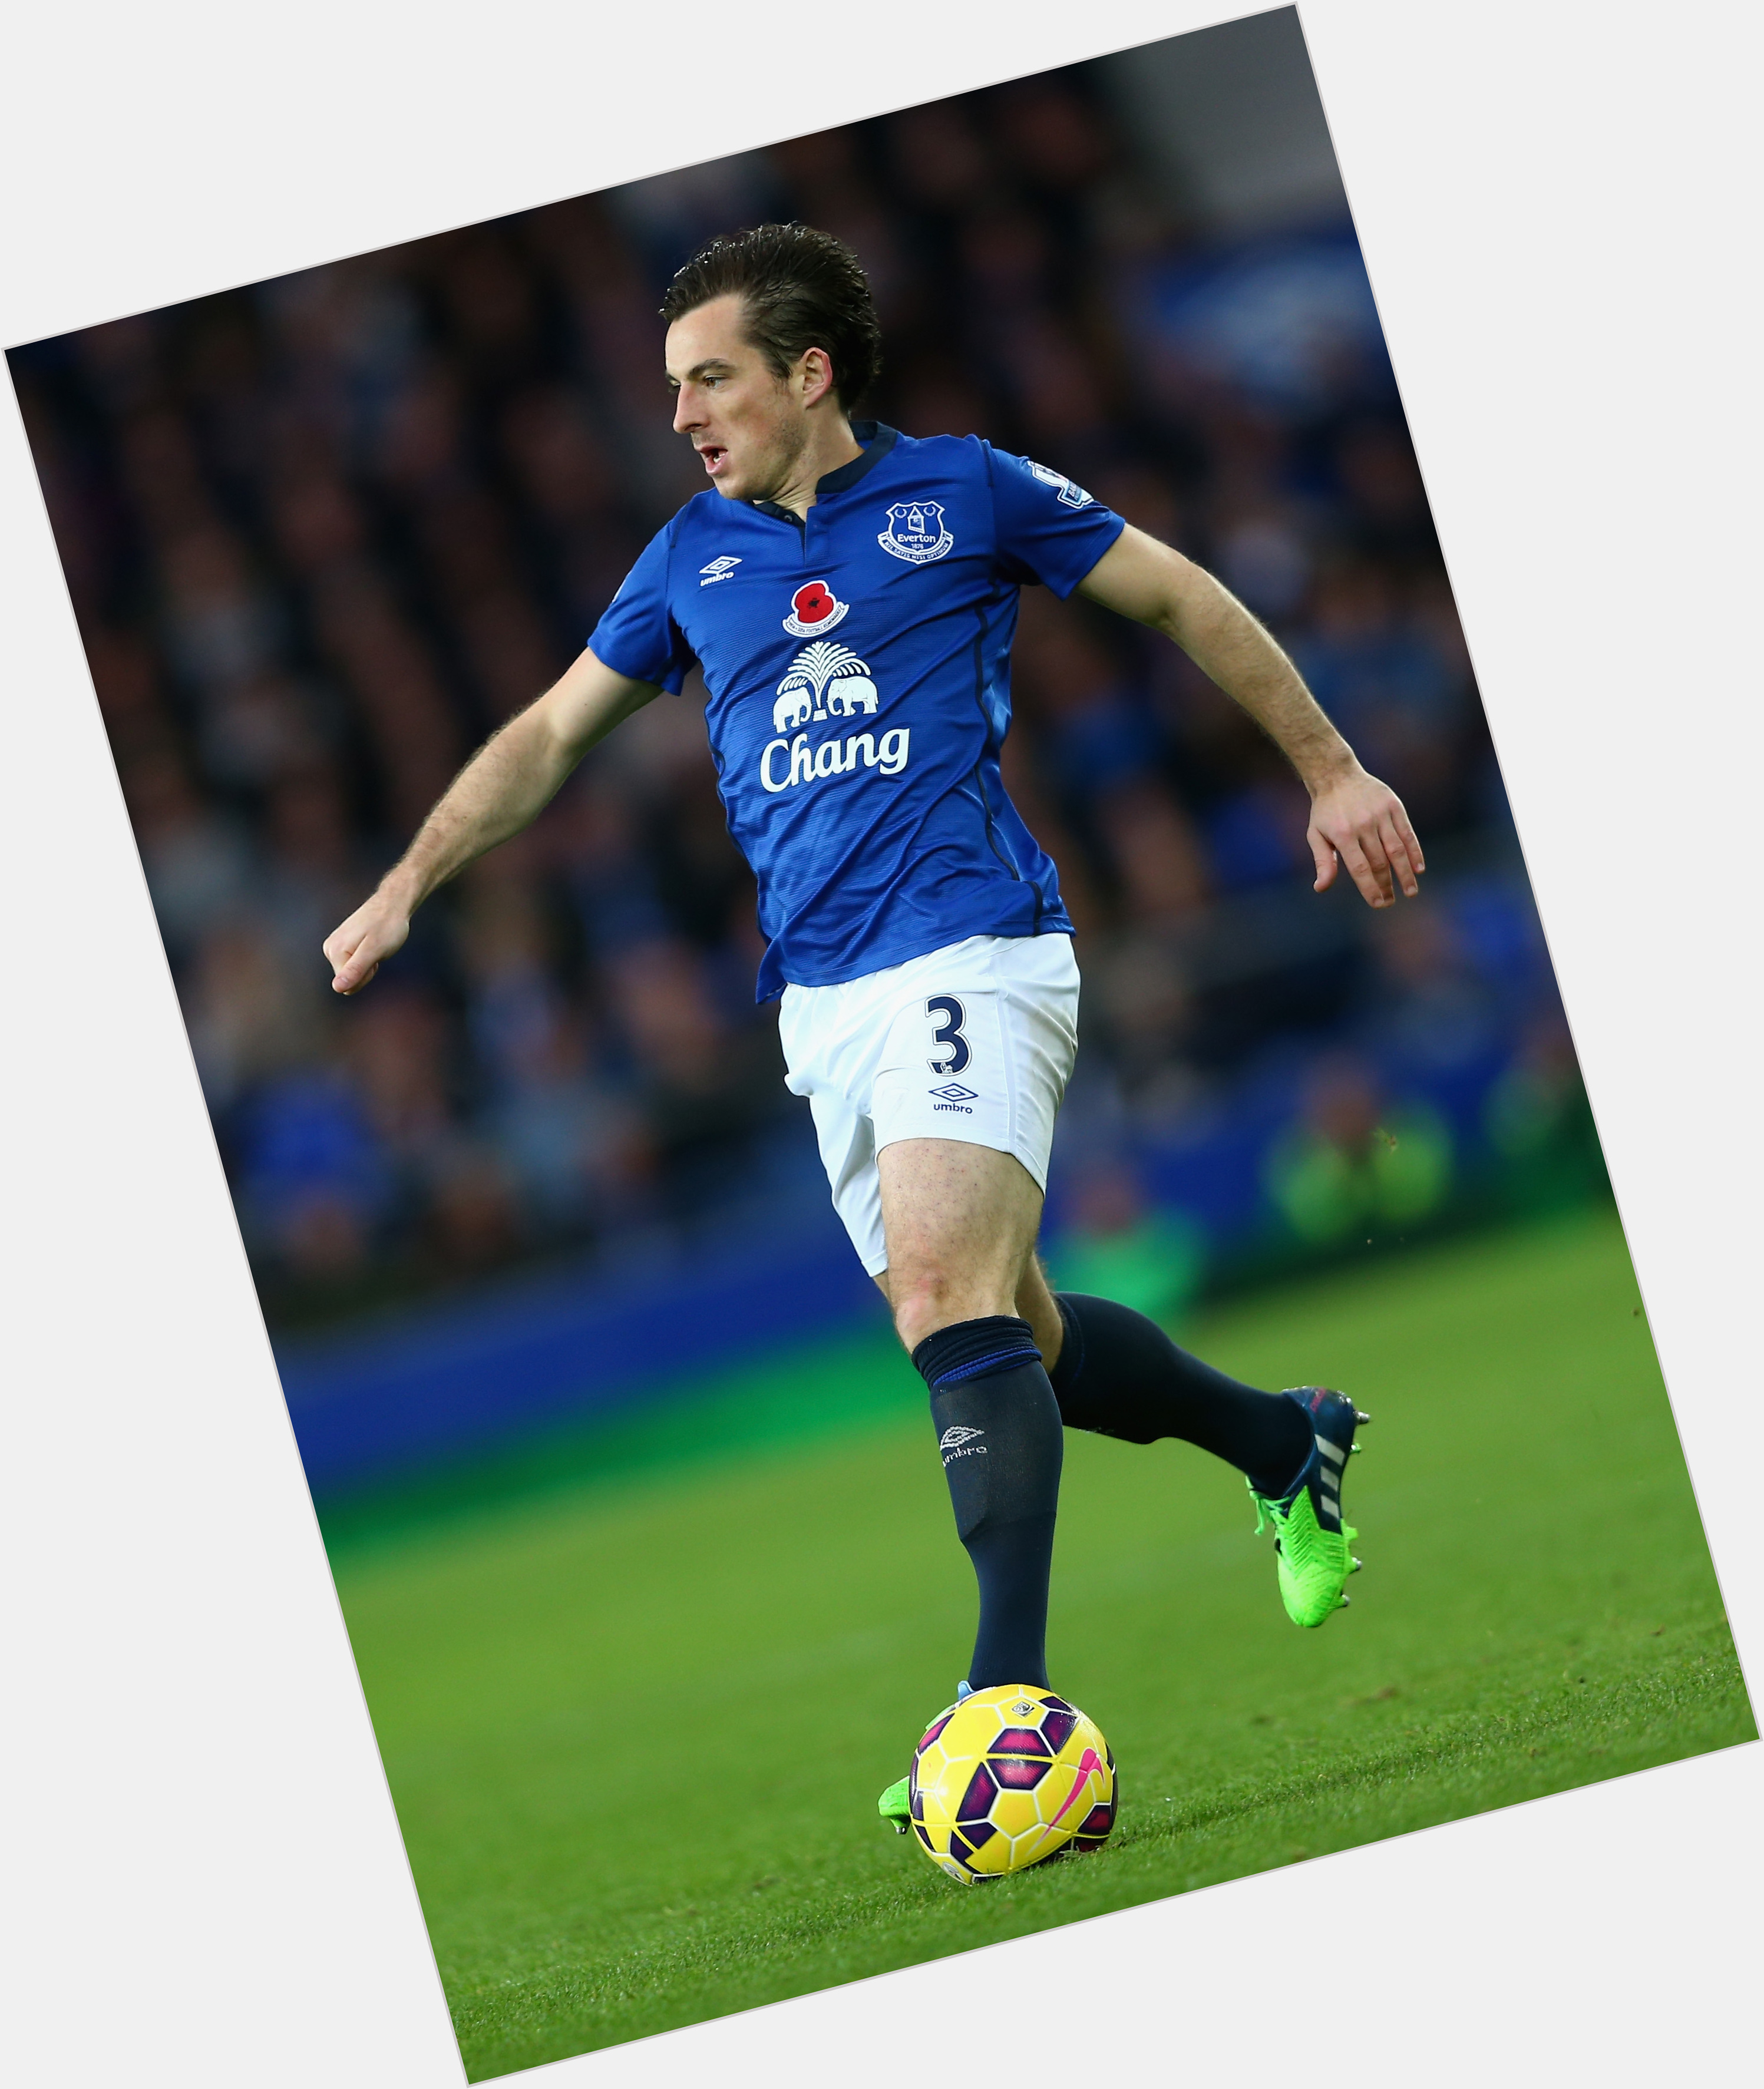 Http://fanpagepress.net/m/L/Leighton Baines New Pic 1